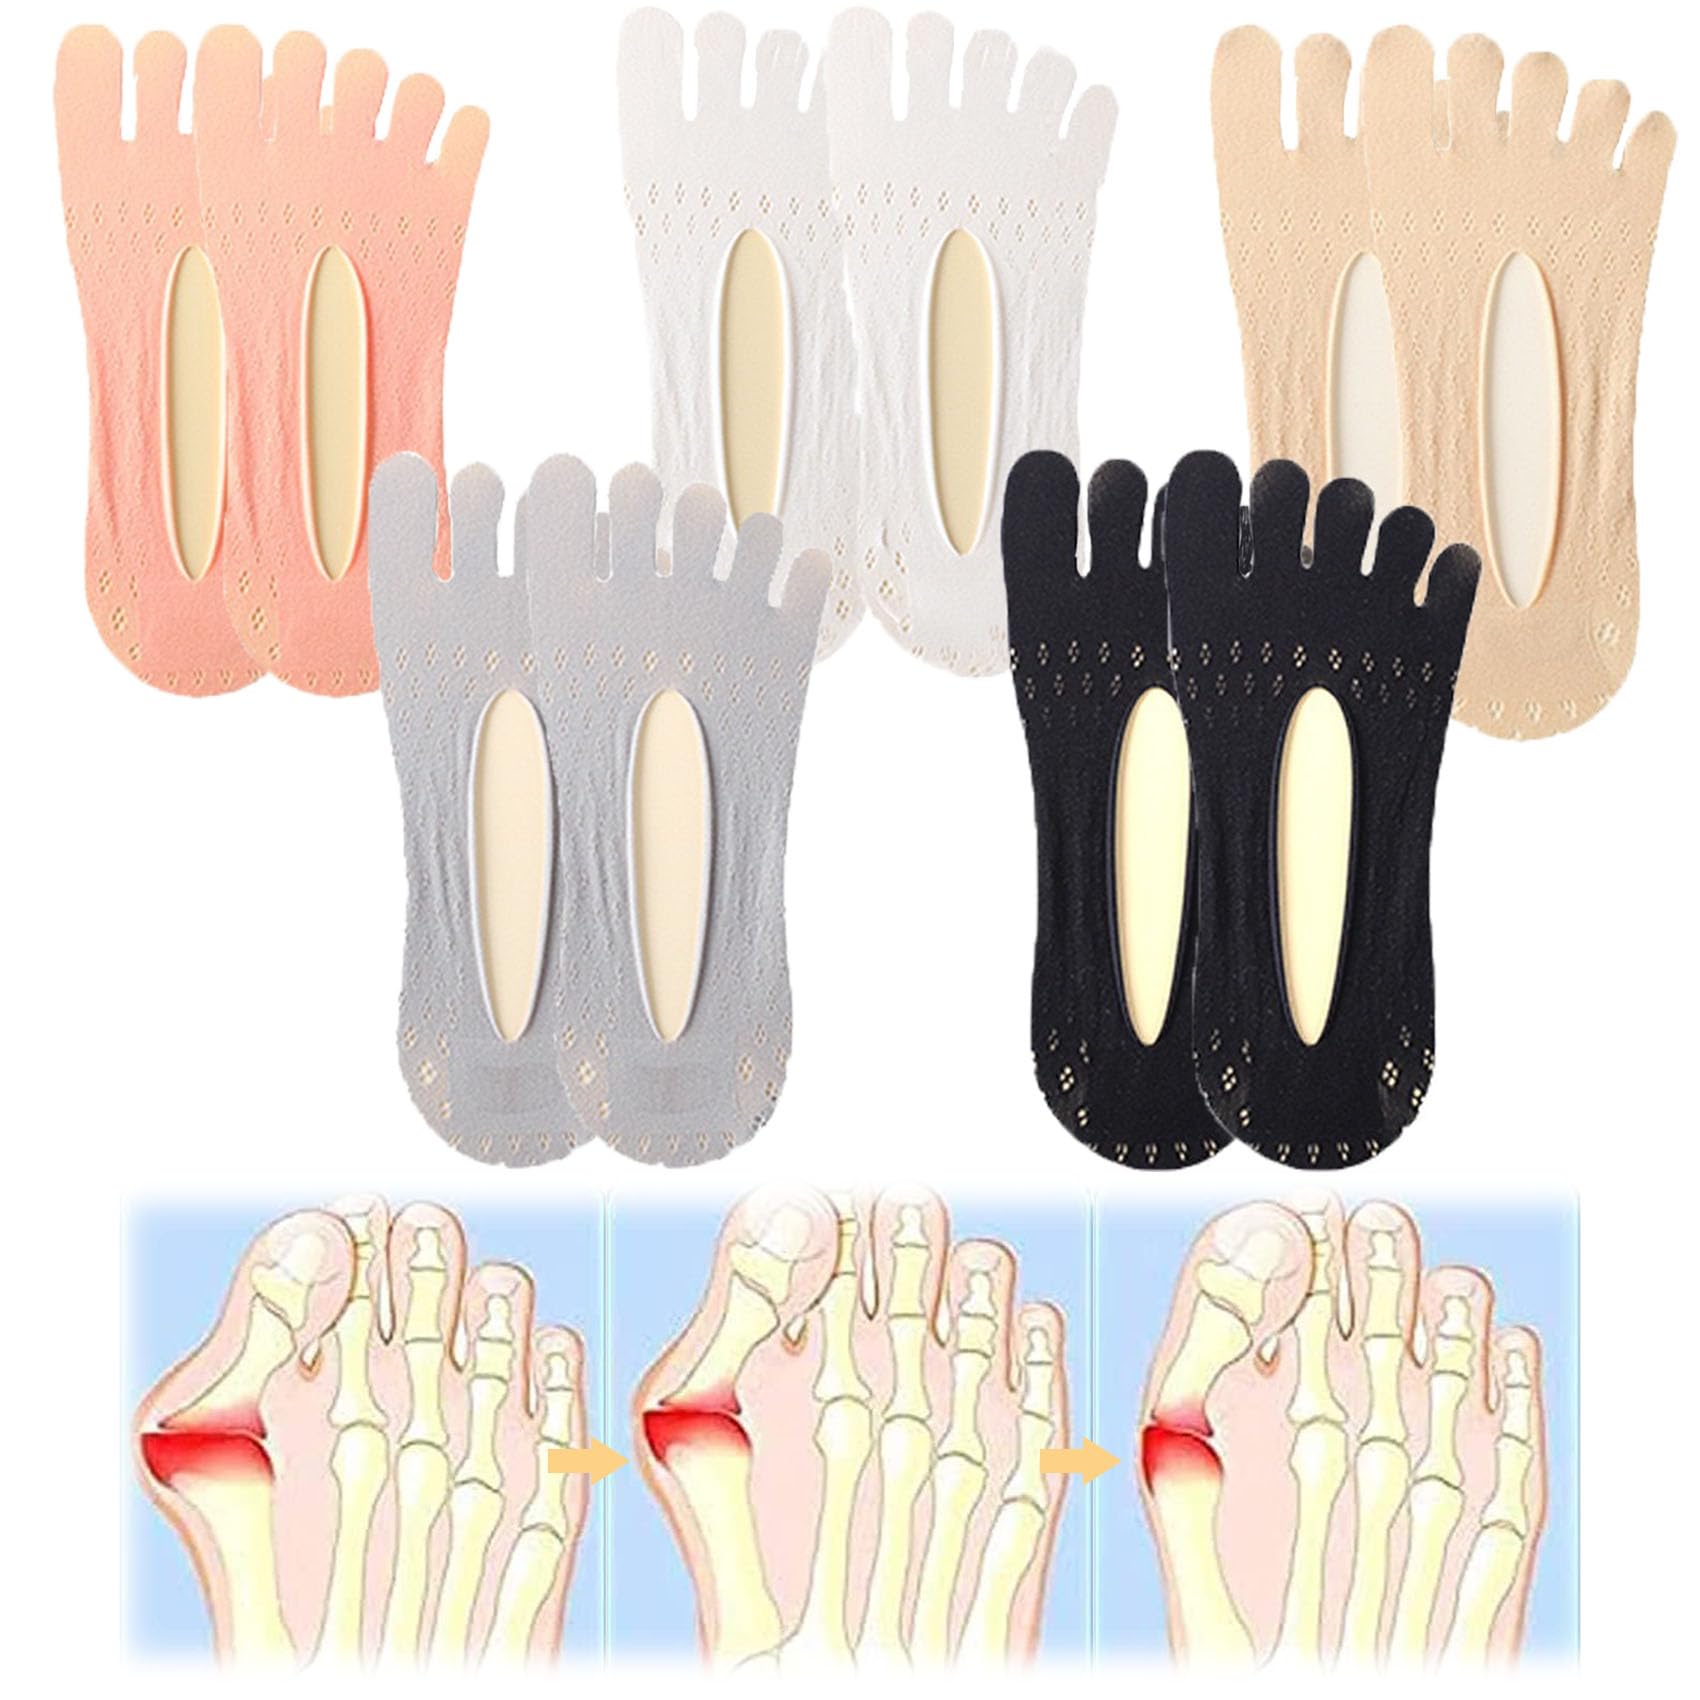 LSNTUU Orthoes Bunion Relief Socks for Women Orthopedic Toe Compression ...